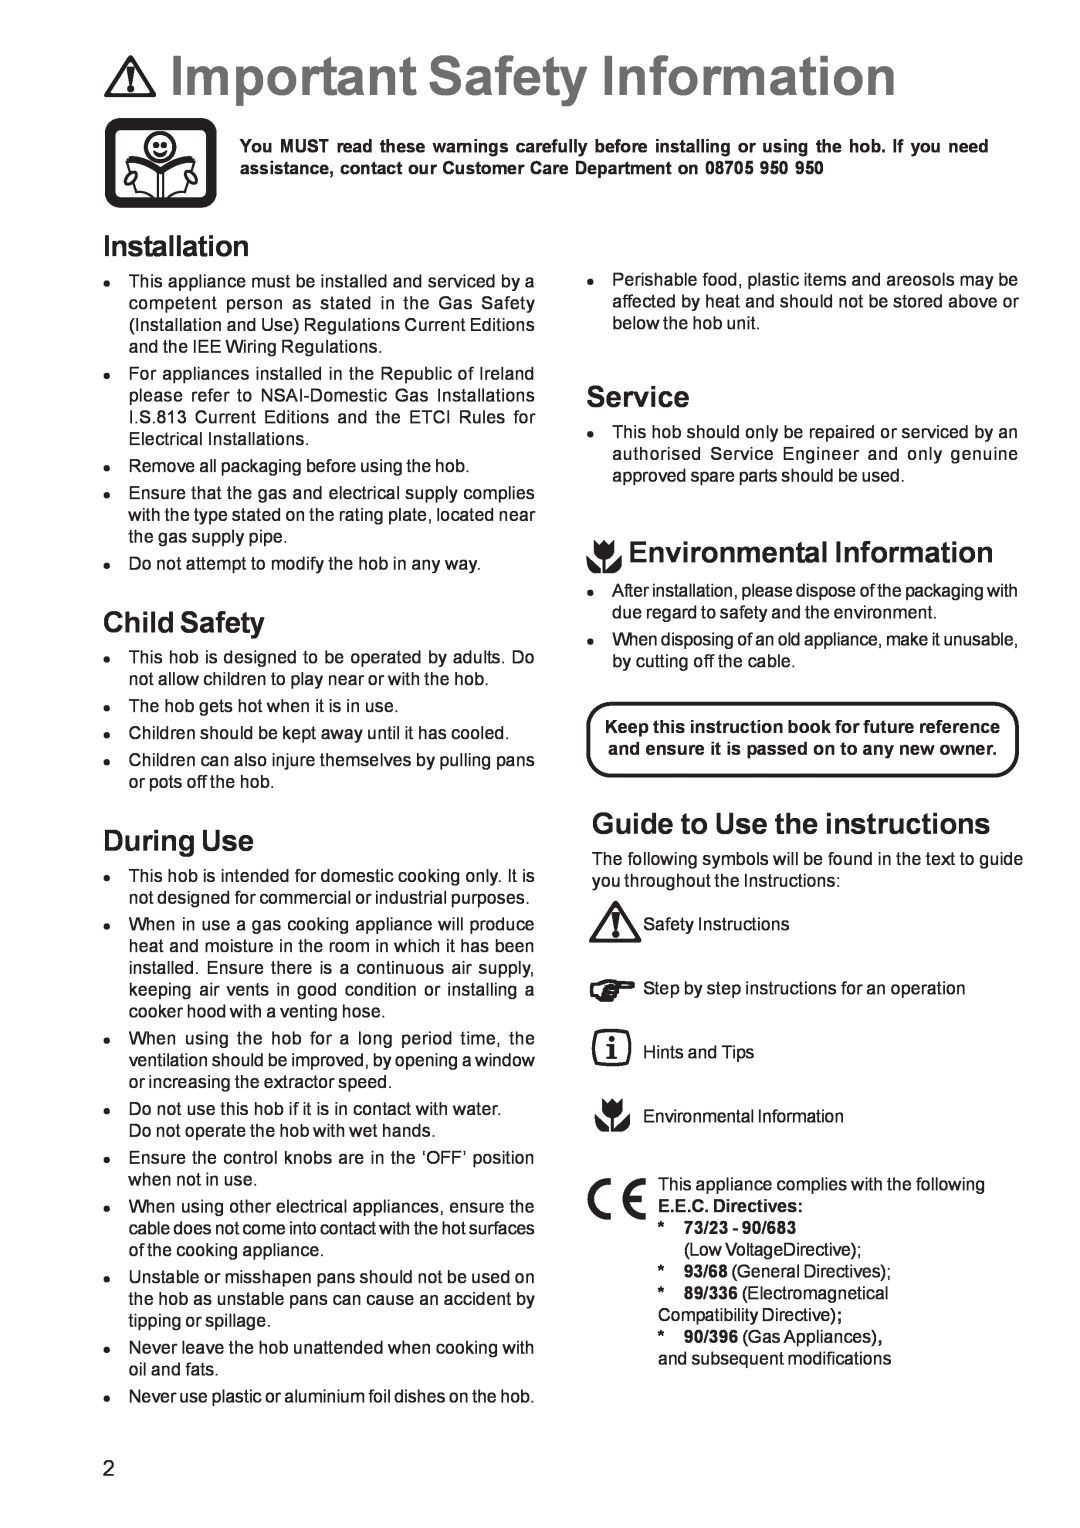 Electrolux EHG 7763 manual Important Safety Information, Installation, Child Safety, Service, Environmental Information 